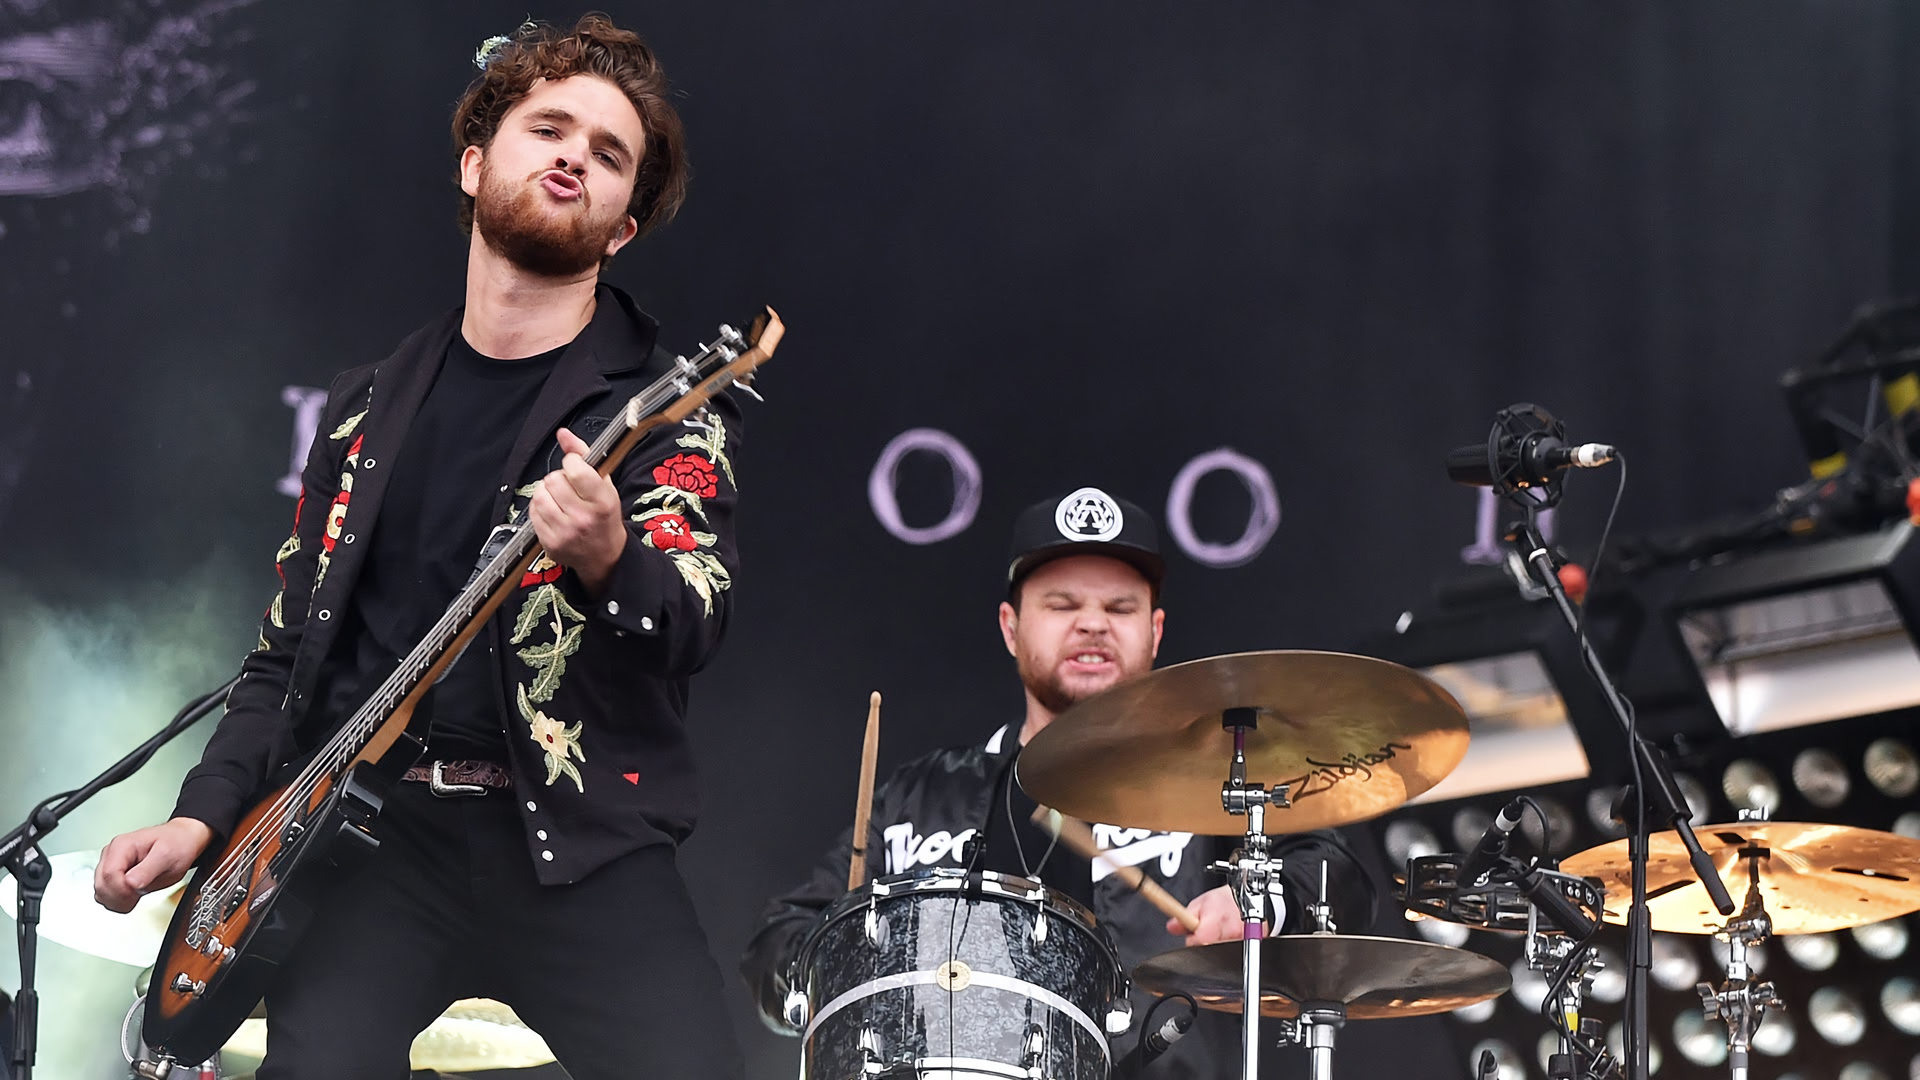 HD desktop wallpaper featuring Royal Blood band members performing live, with the guitarist in the foreground and the drummer in the background.